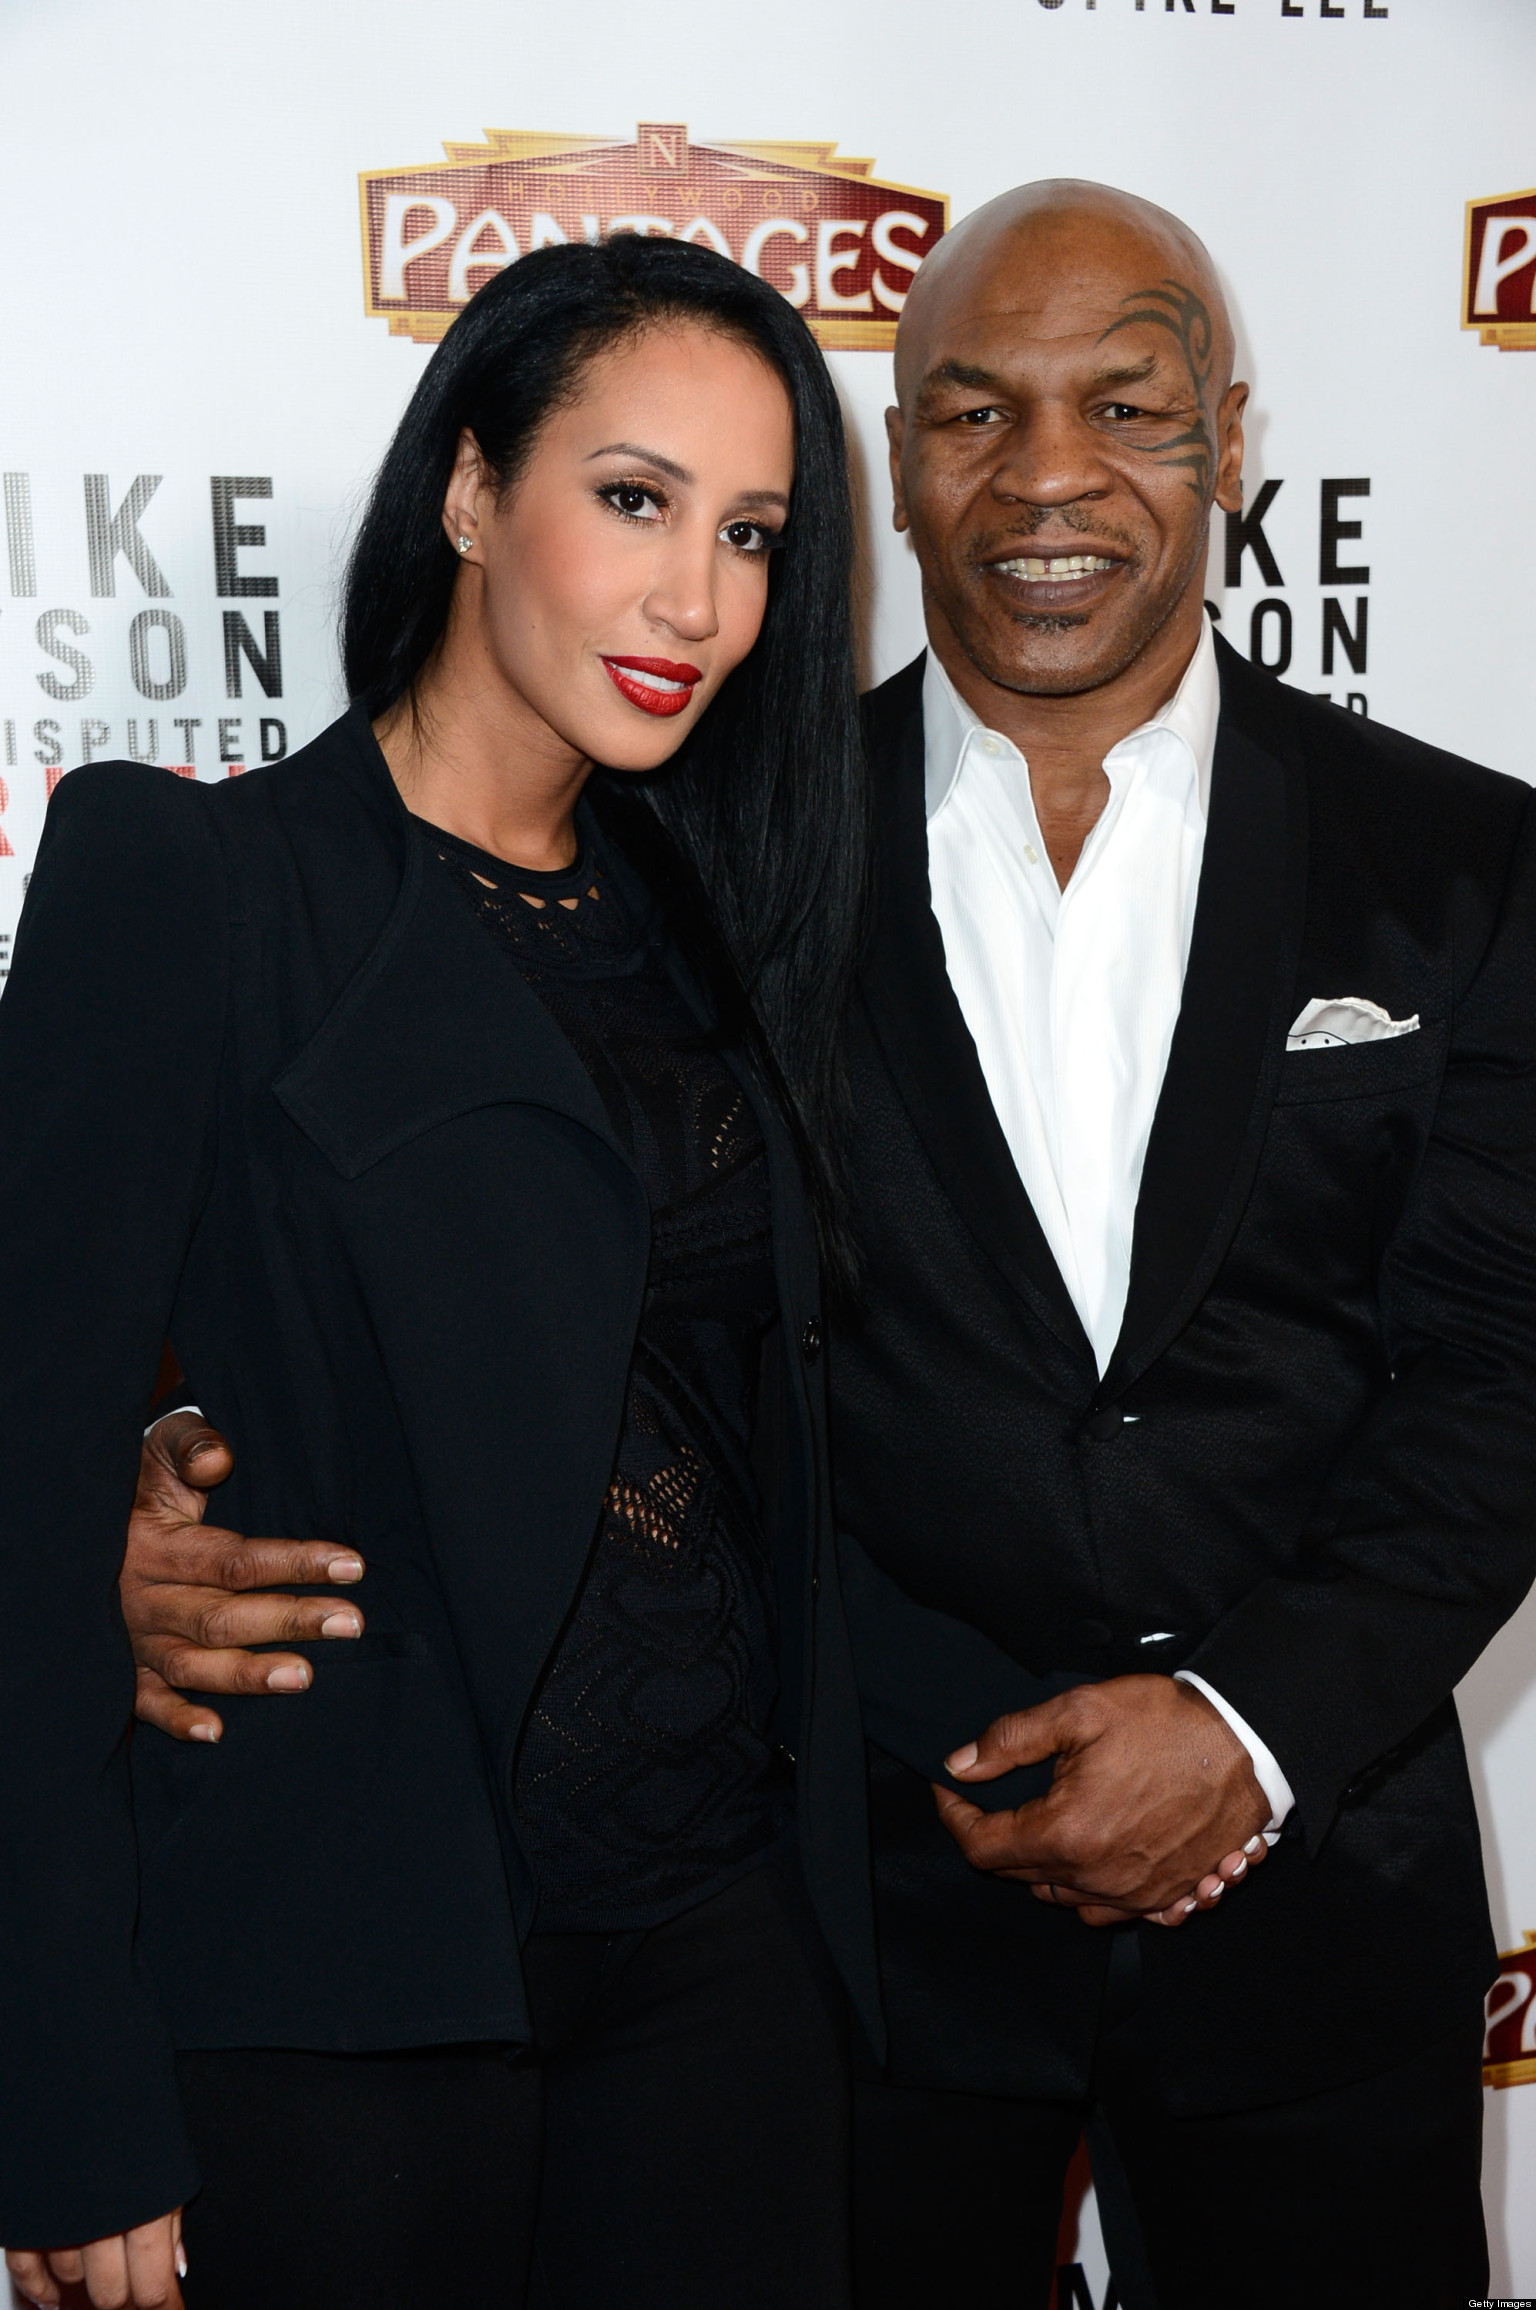 Mike Tyson's Wife Files Lawsuit Against Unknown Defendant Over